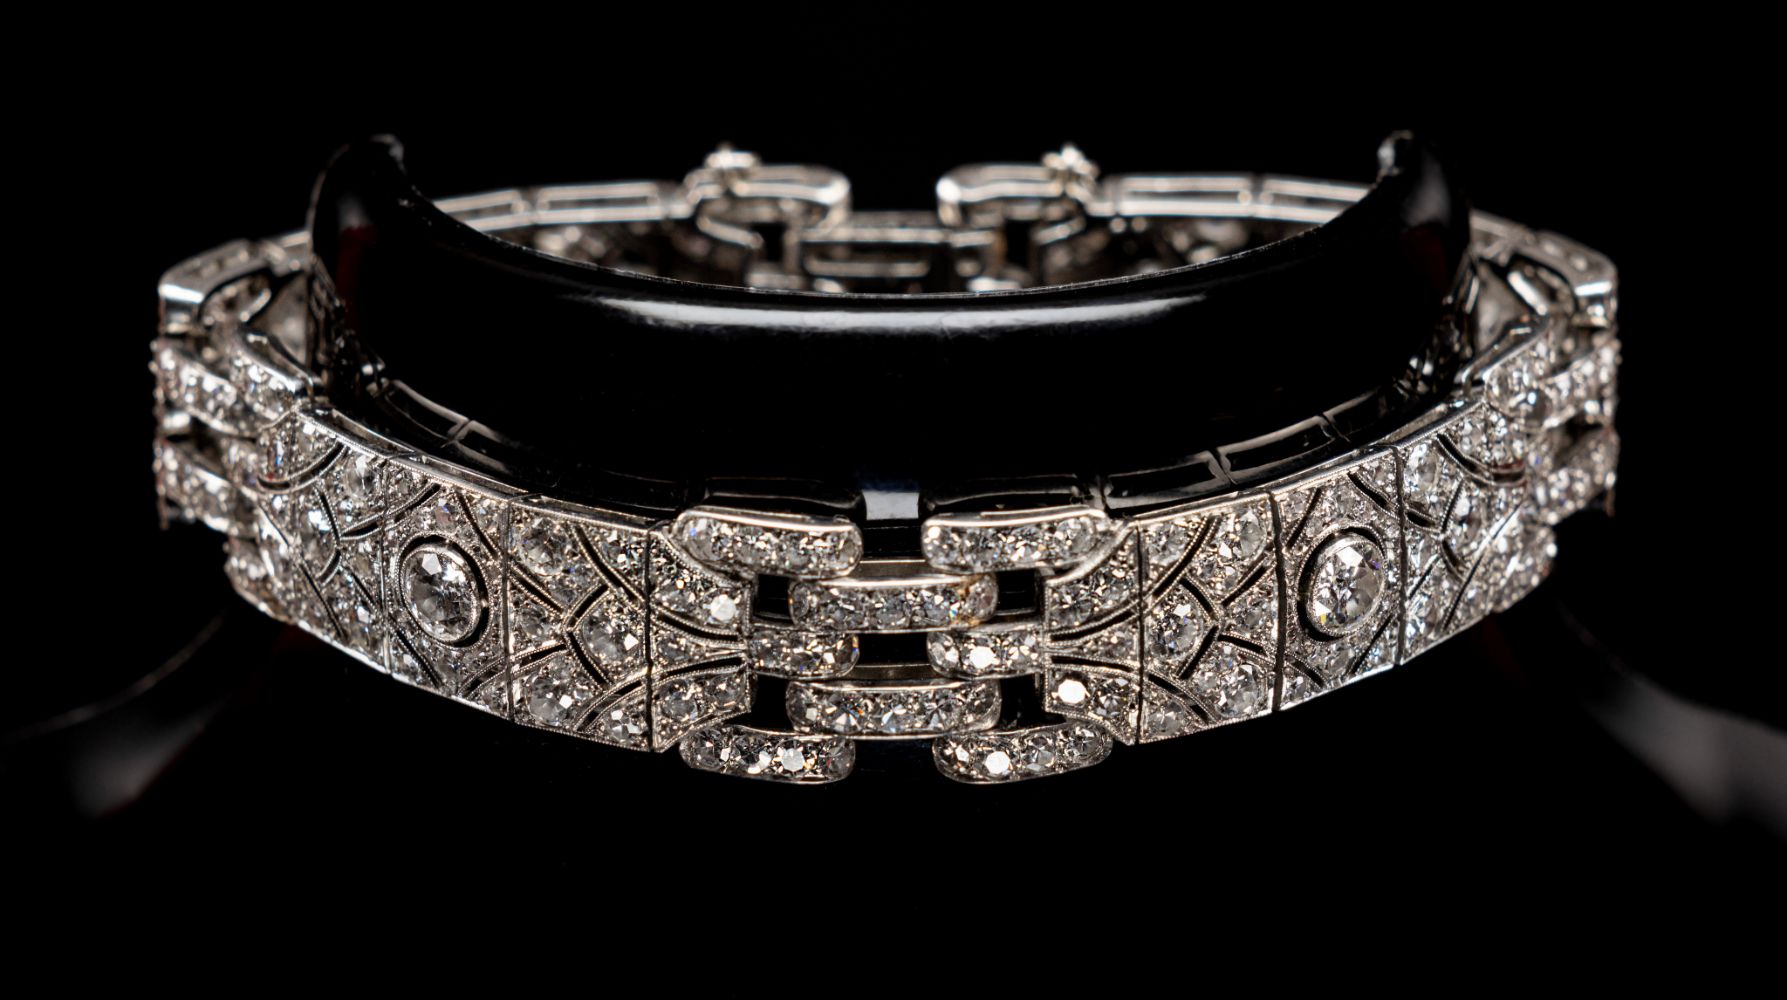 Specialist Jewellery, Gold, Watches, Antiques and Collectables Auction